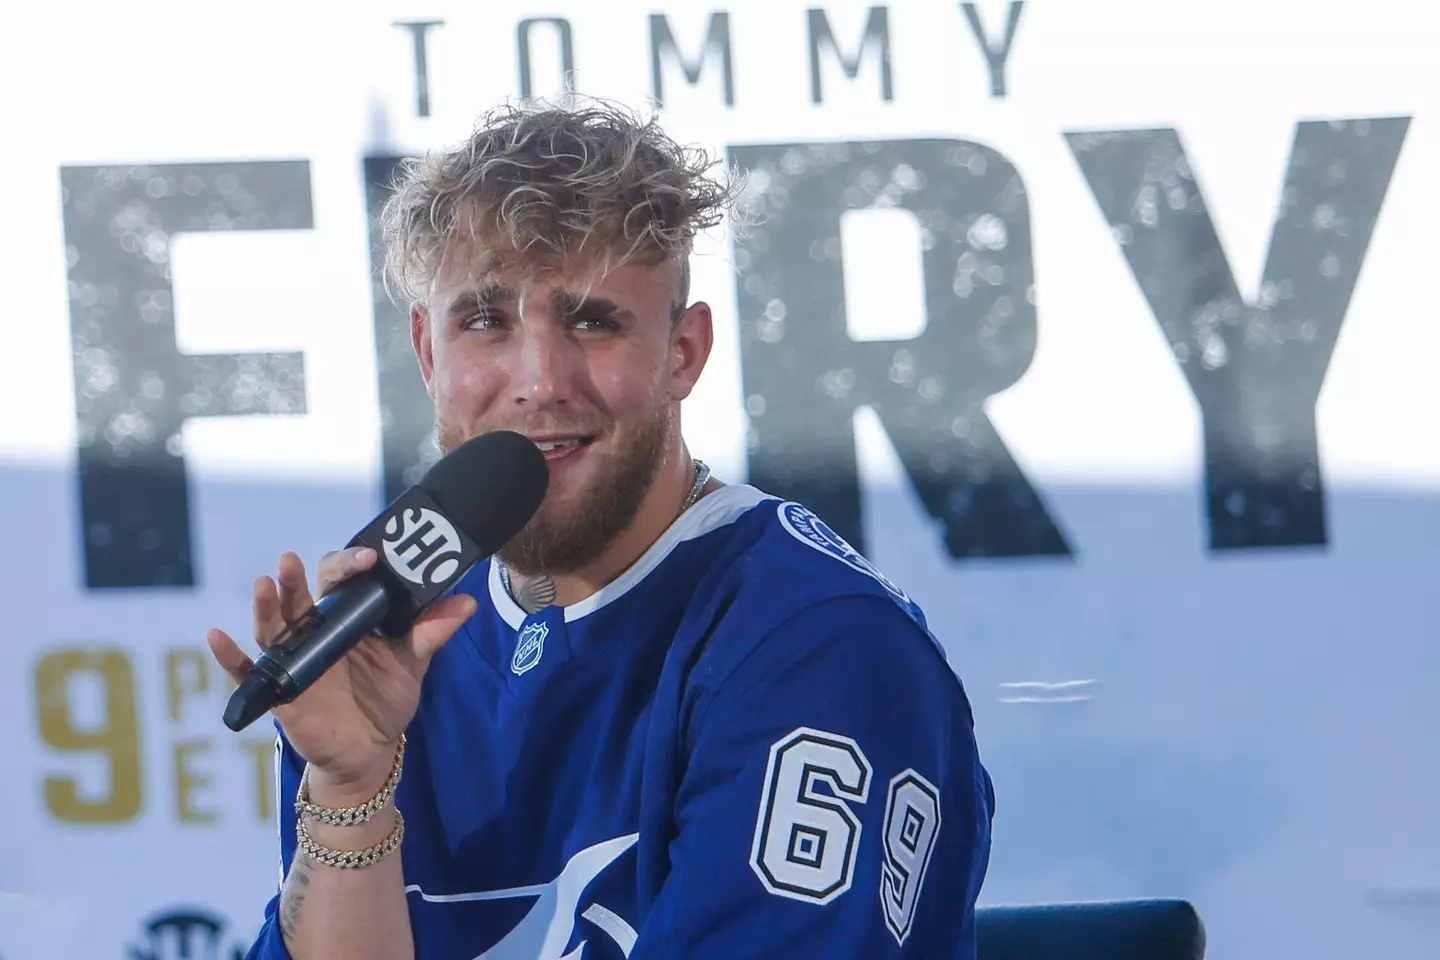 Jake Paul has responded to Tommy Fury being denied entry into the US.